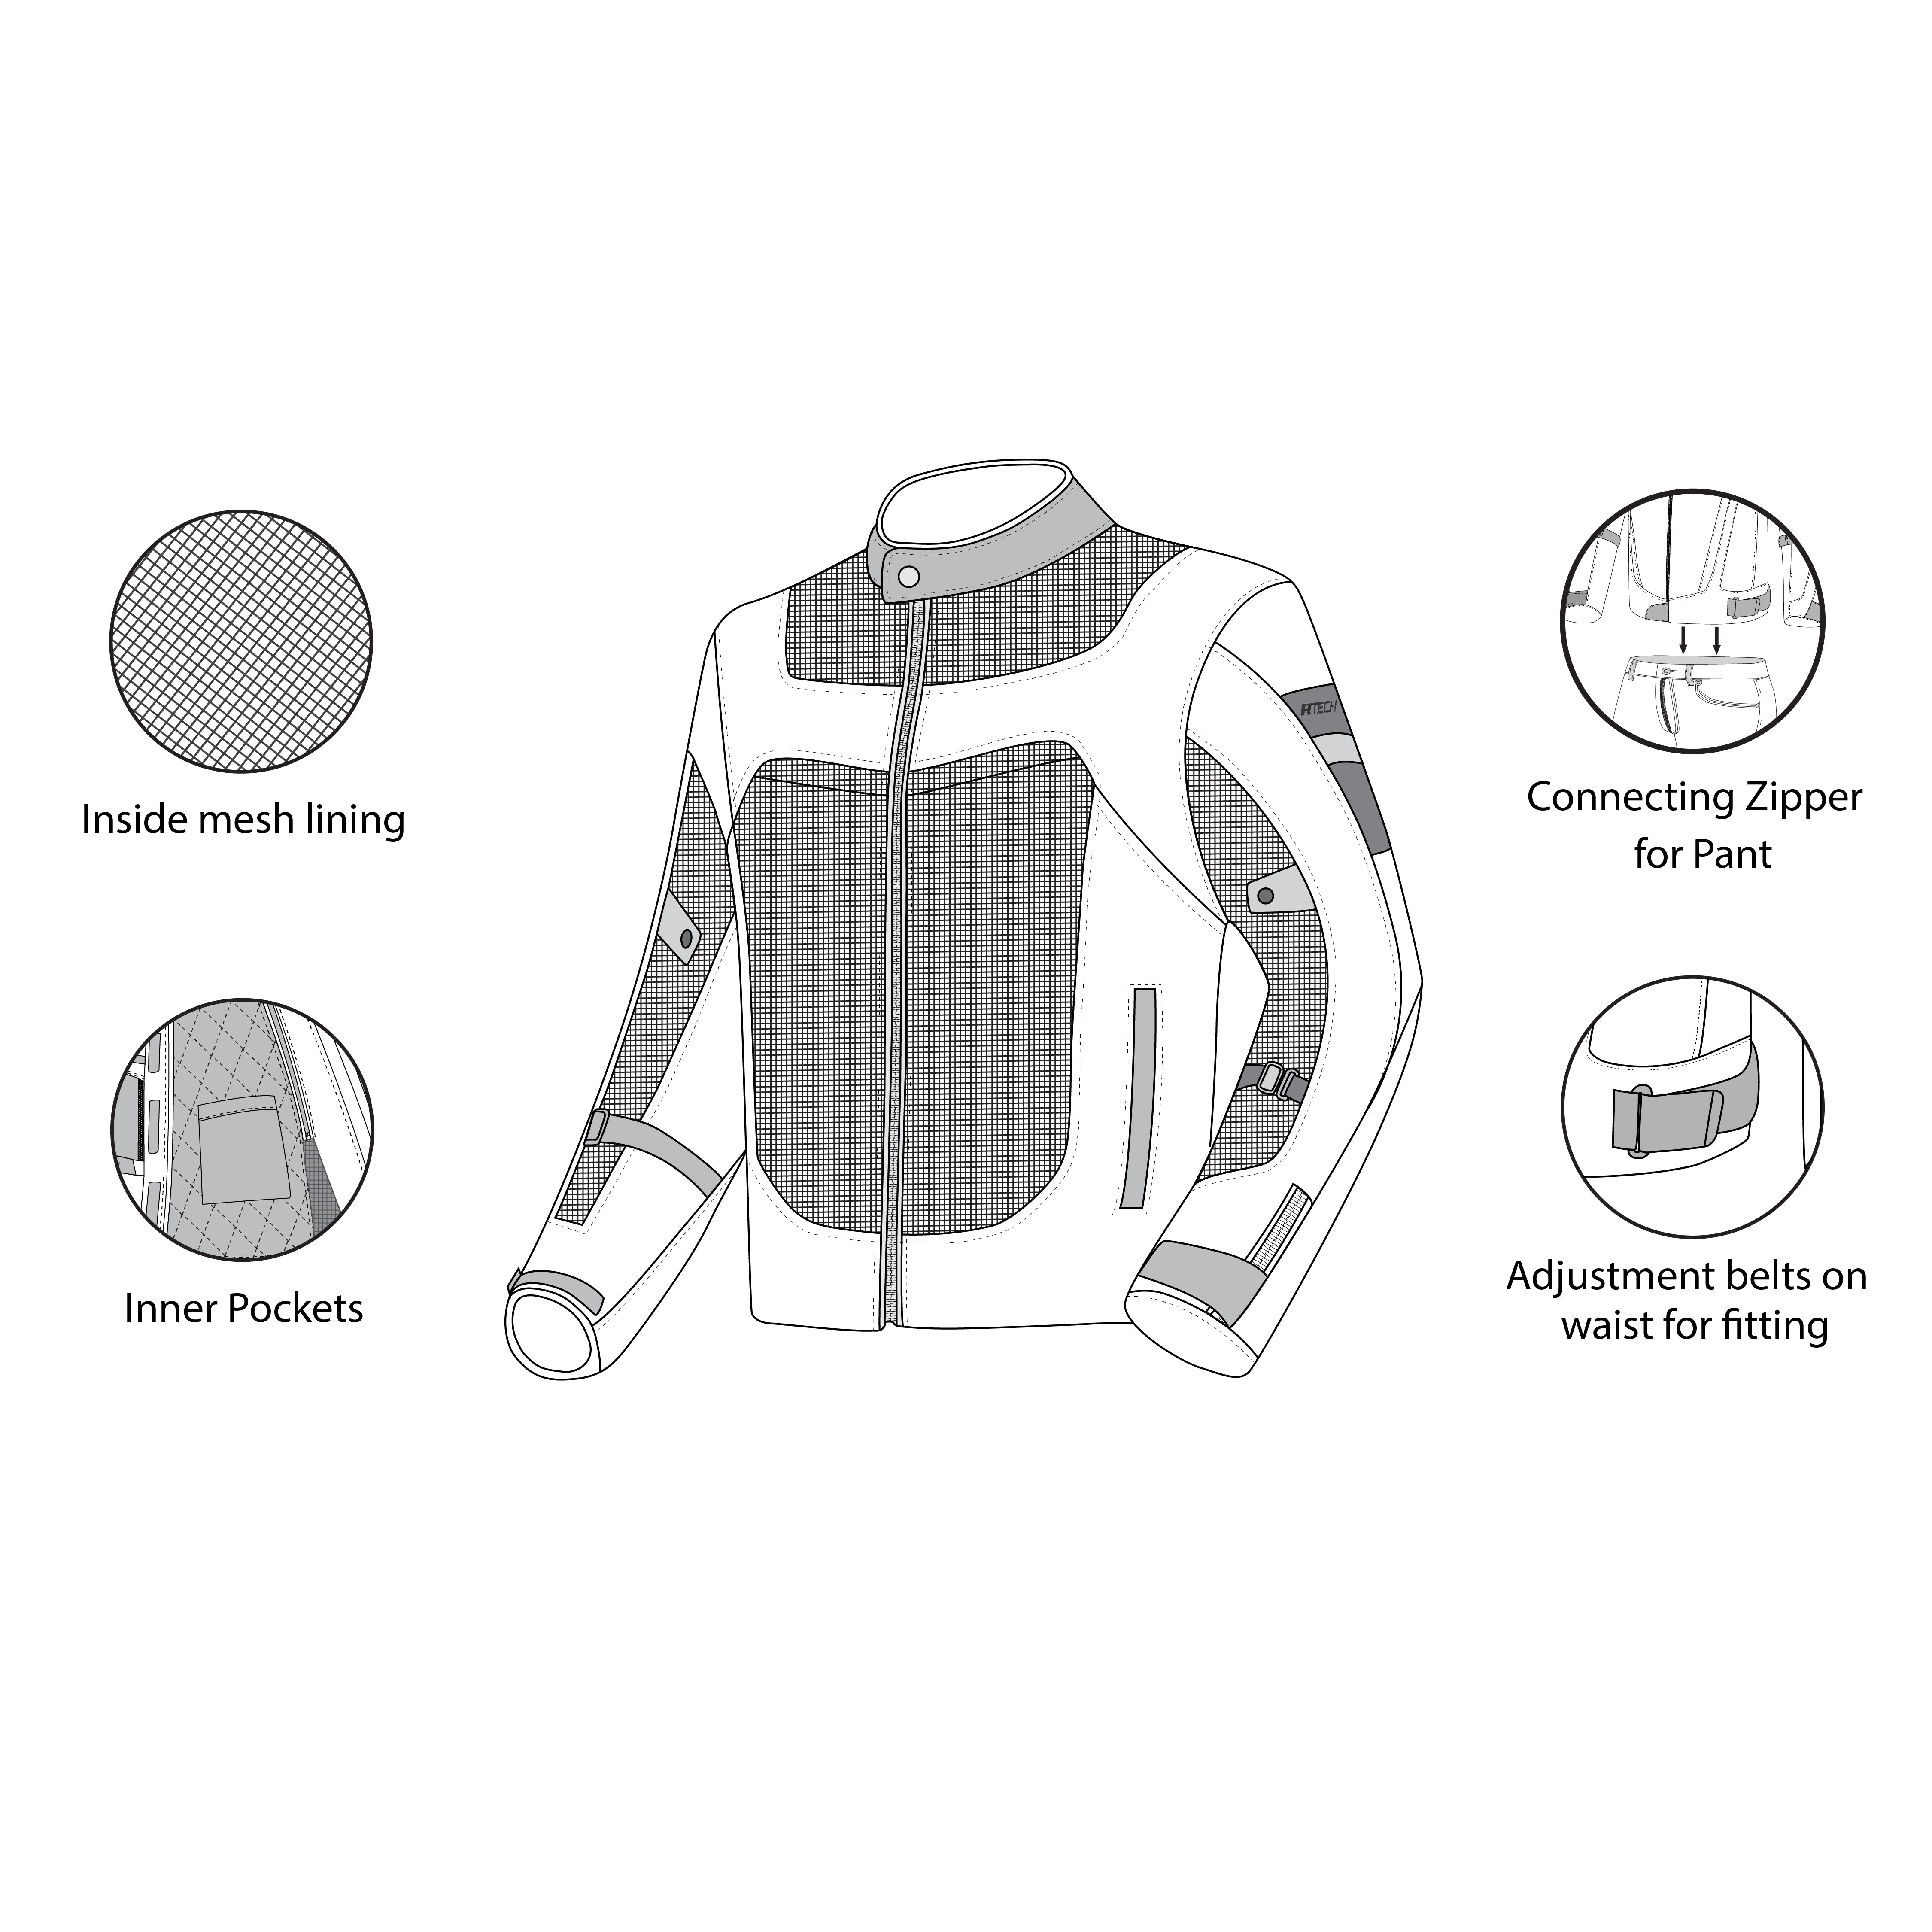 infographic sketch r-tech spiral mesh textile jacket ice, grey and red top front side view